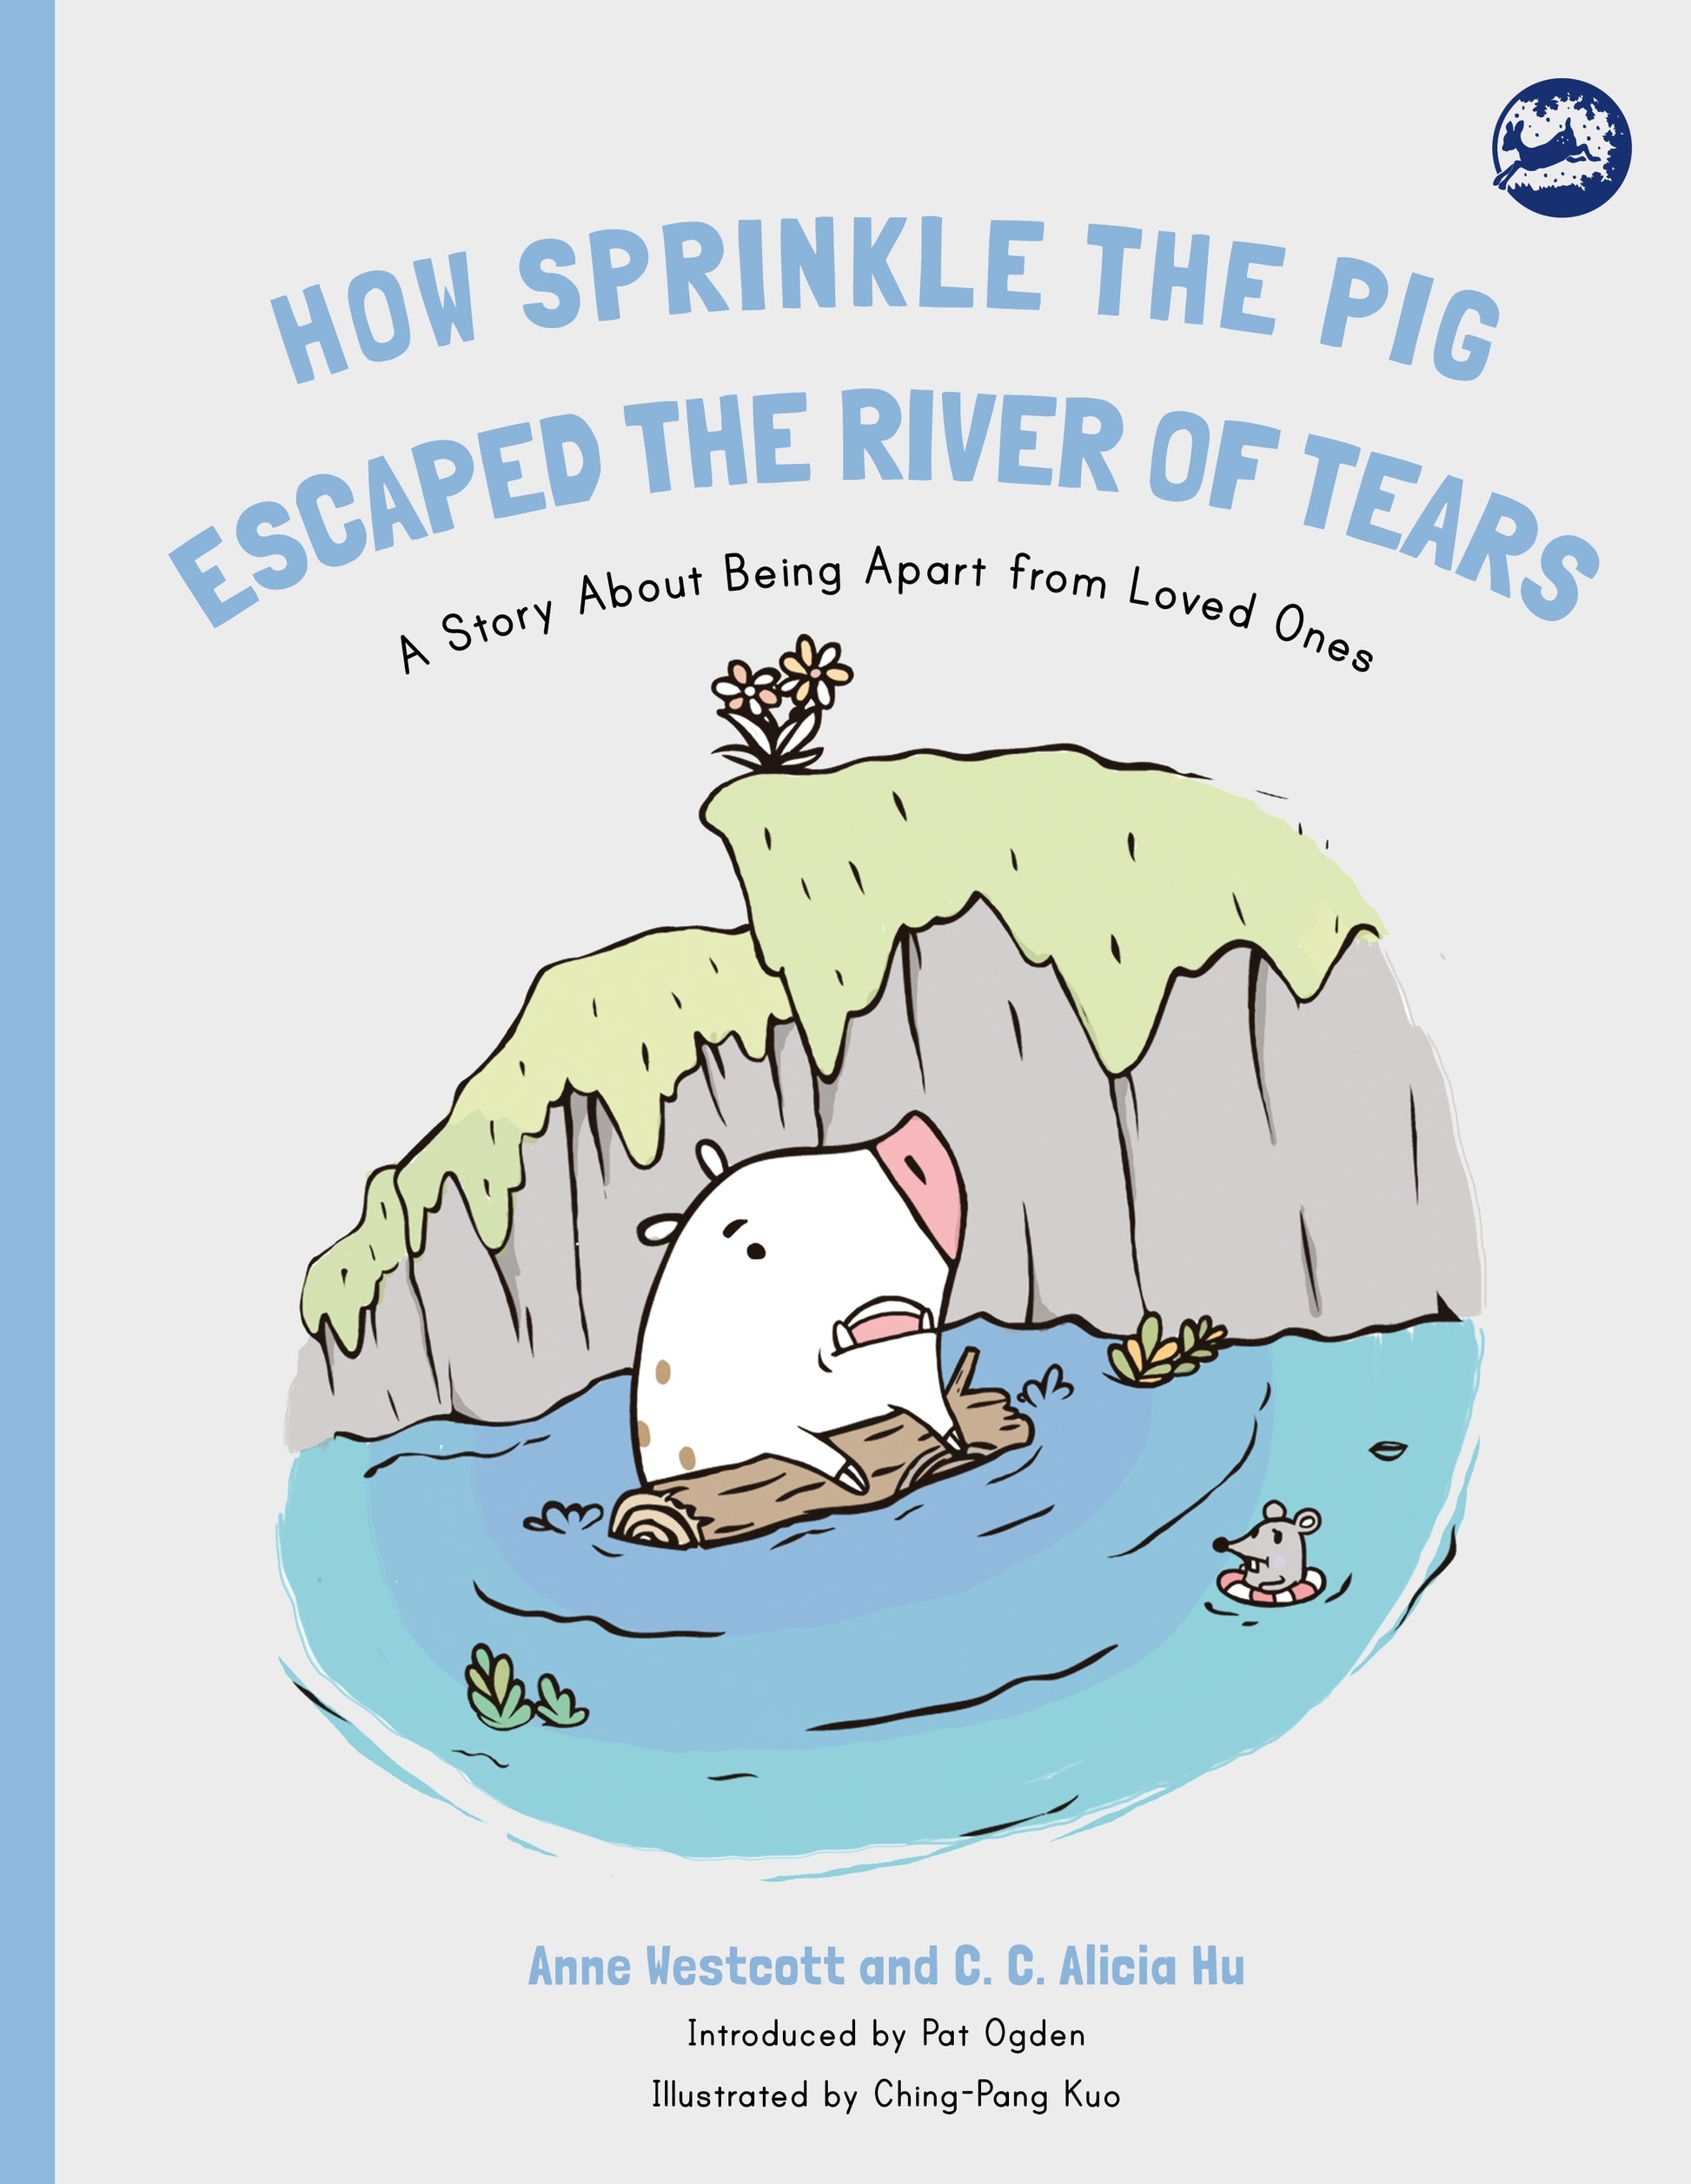 How Sprinkle the Pig Escaped the River of Tears by Anne Westcott, C. C. Alicia Hu, Ching-Pang Kuo